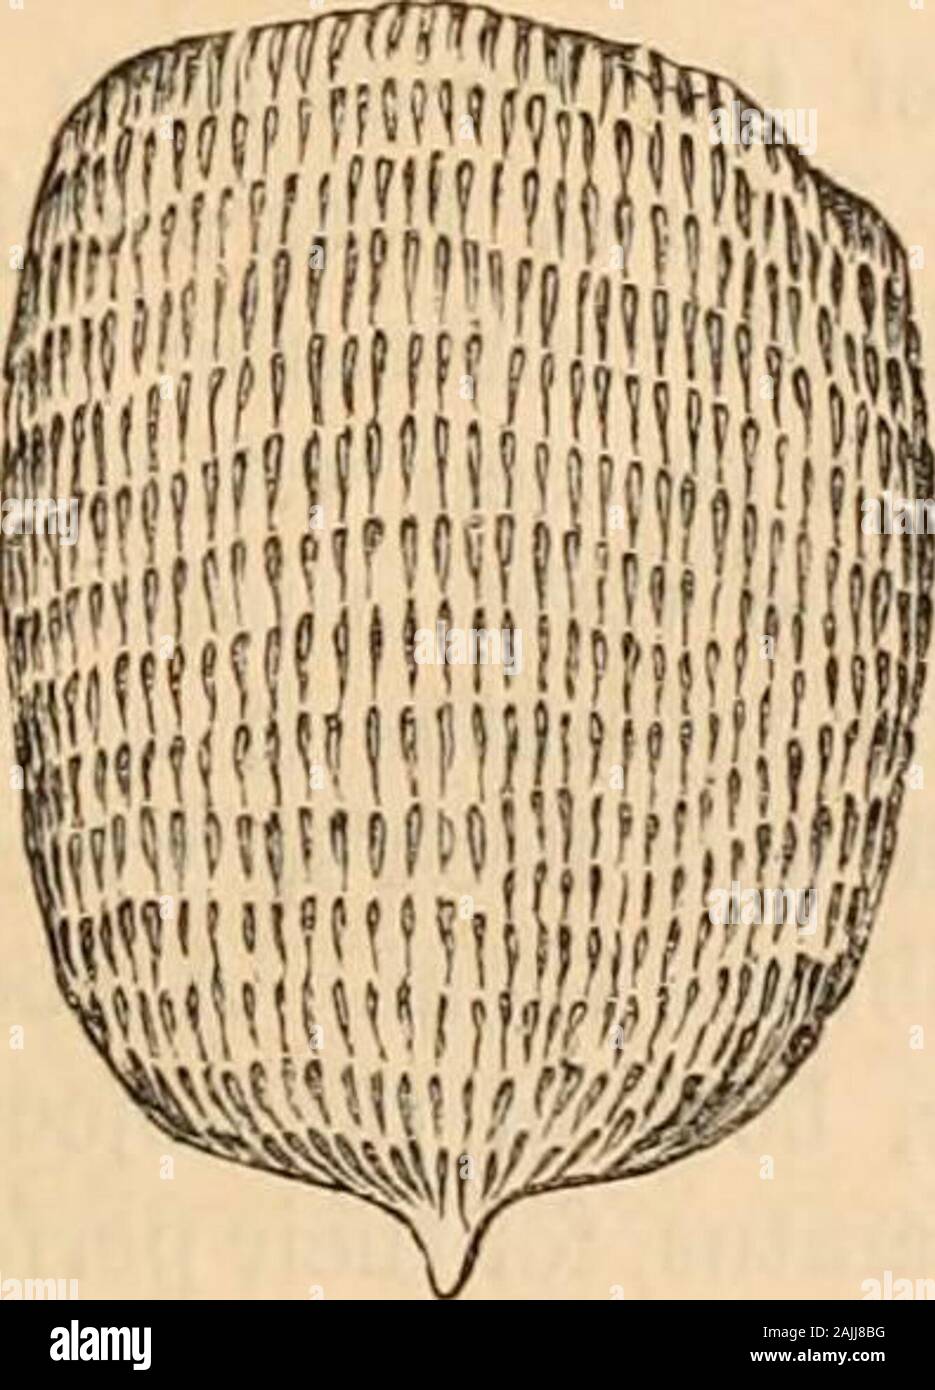 Hardwicke's science-gossip : an illustrated medium of interchange and gossip for students and lovers of nature . Fig. 46. White Podura {Lepidocyrtus Albinos?). I have lately noticed another Podura—pearly-white in colour, with red eyes, small, having ratherlong antenna;, and furnished besides with long hairssomewhat like the speckled. I am told its nameis Lepidocyrtus Albinos, and that it is the smallest. Fig. 47. Scale of White Podura;  objective, A eyepiece. of the scale-bearing Podura;. It seems to be verypartial to the vicinity of flower-pots, and under-neath them it may often be found. On Stock Photo